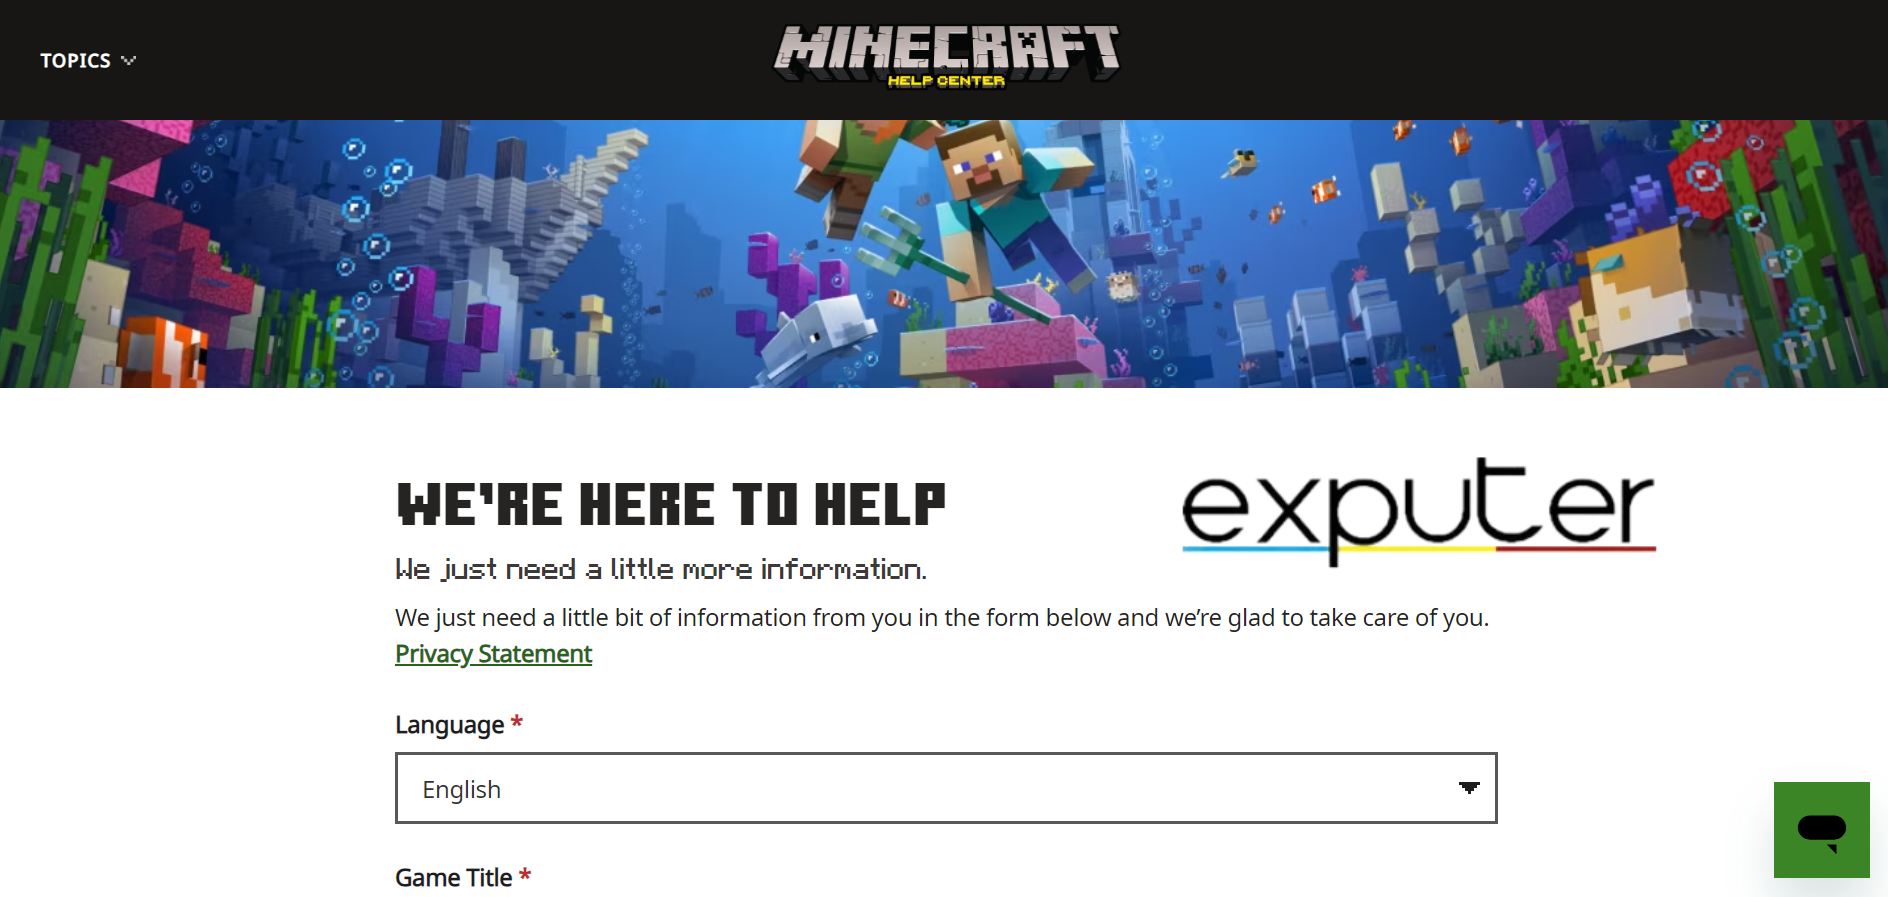 Contact Minecraft Support (Image by exputer)